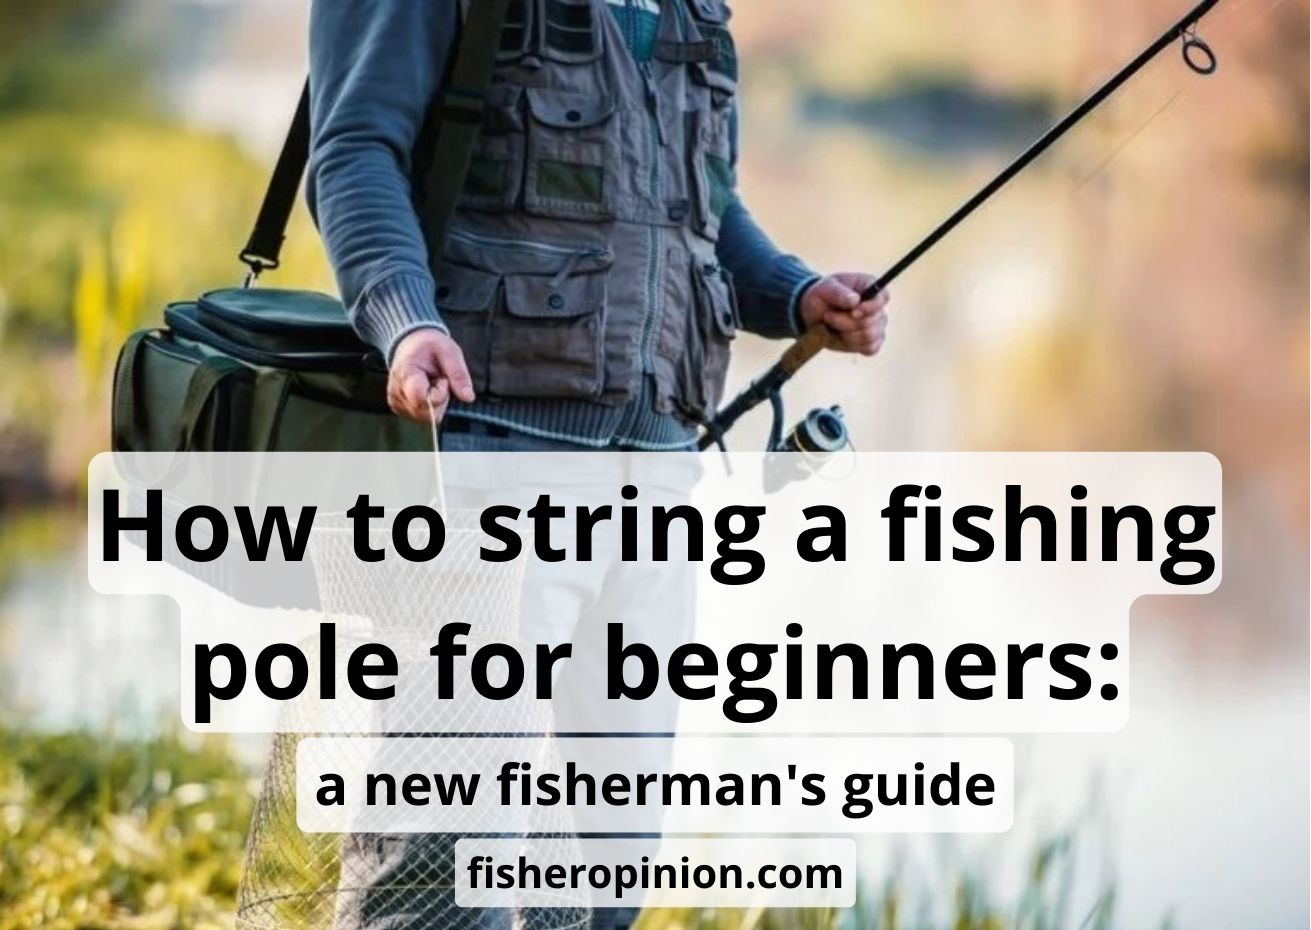 How To String A Fishing Pole For Beginners: The Best Guide